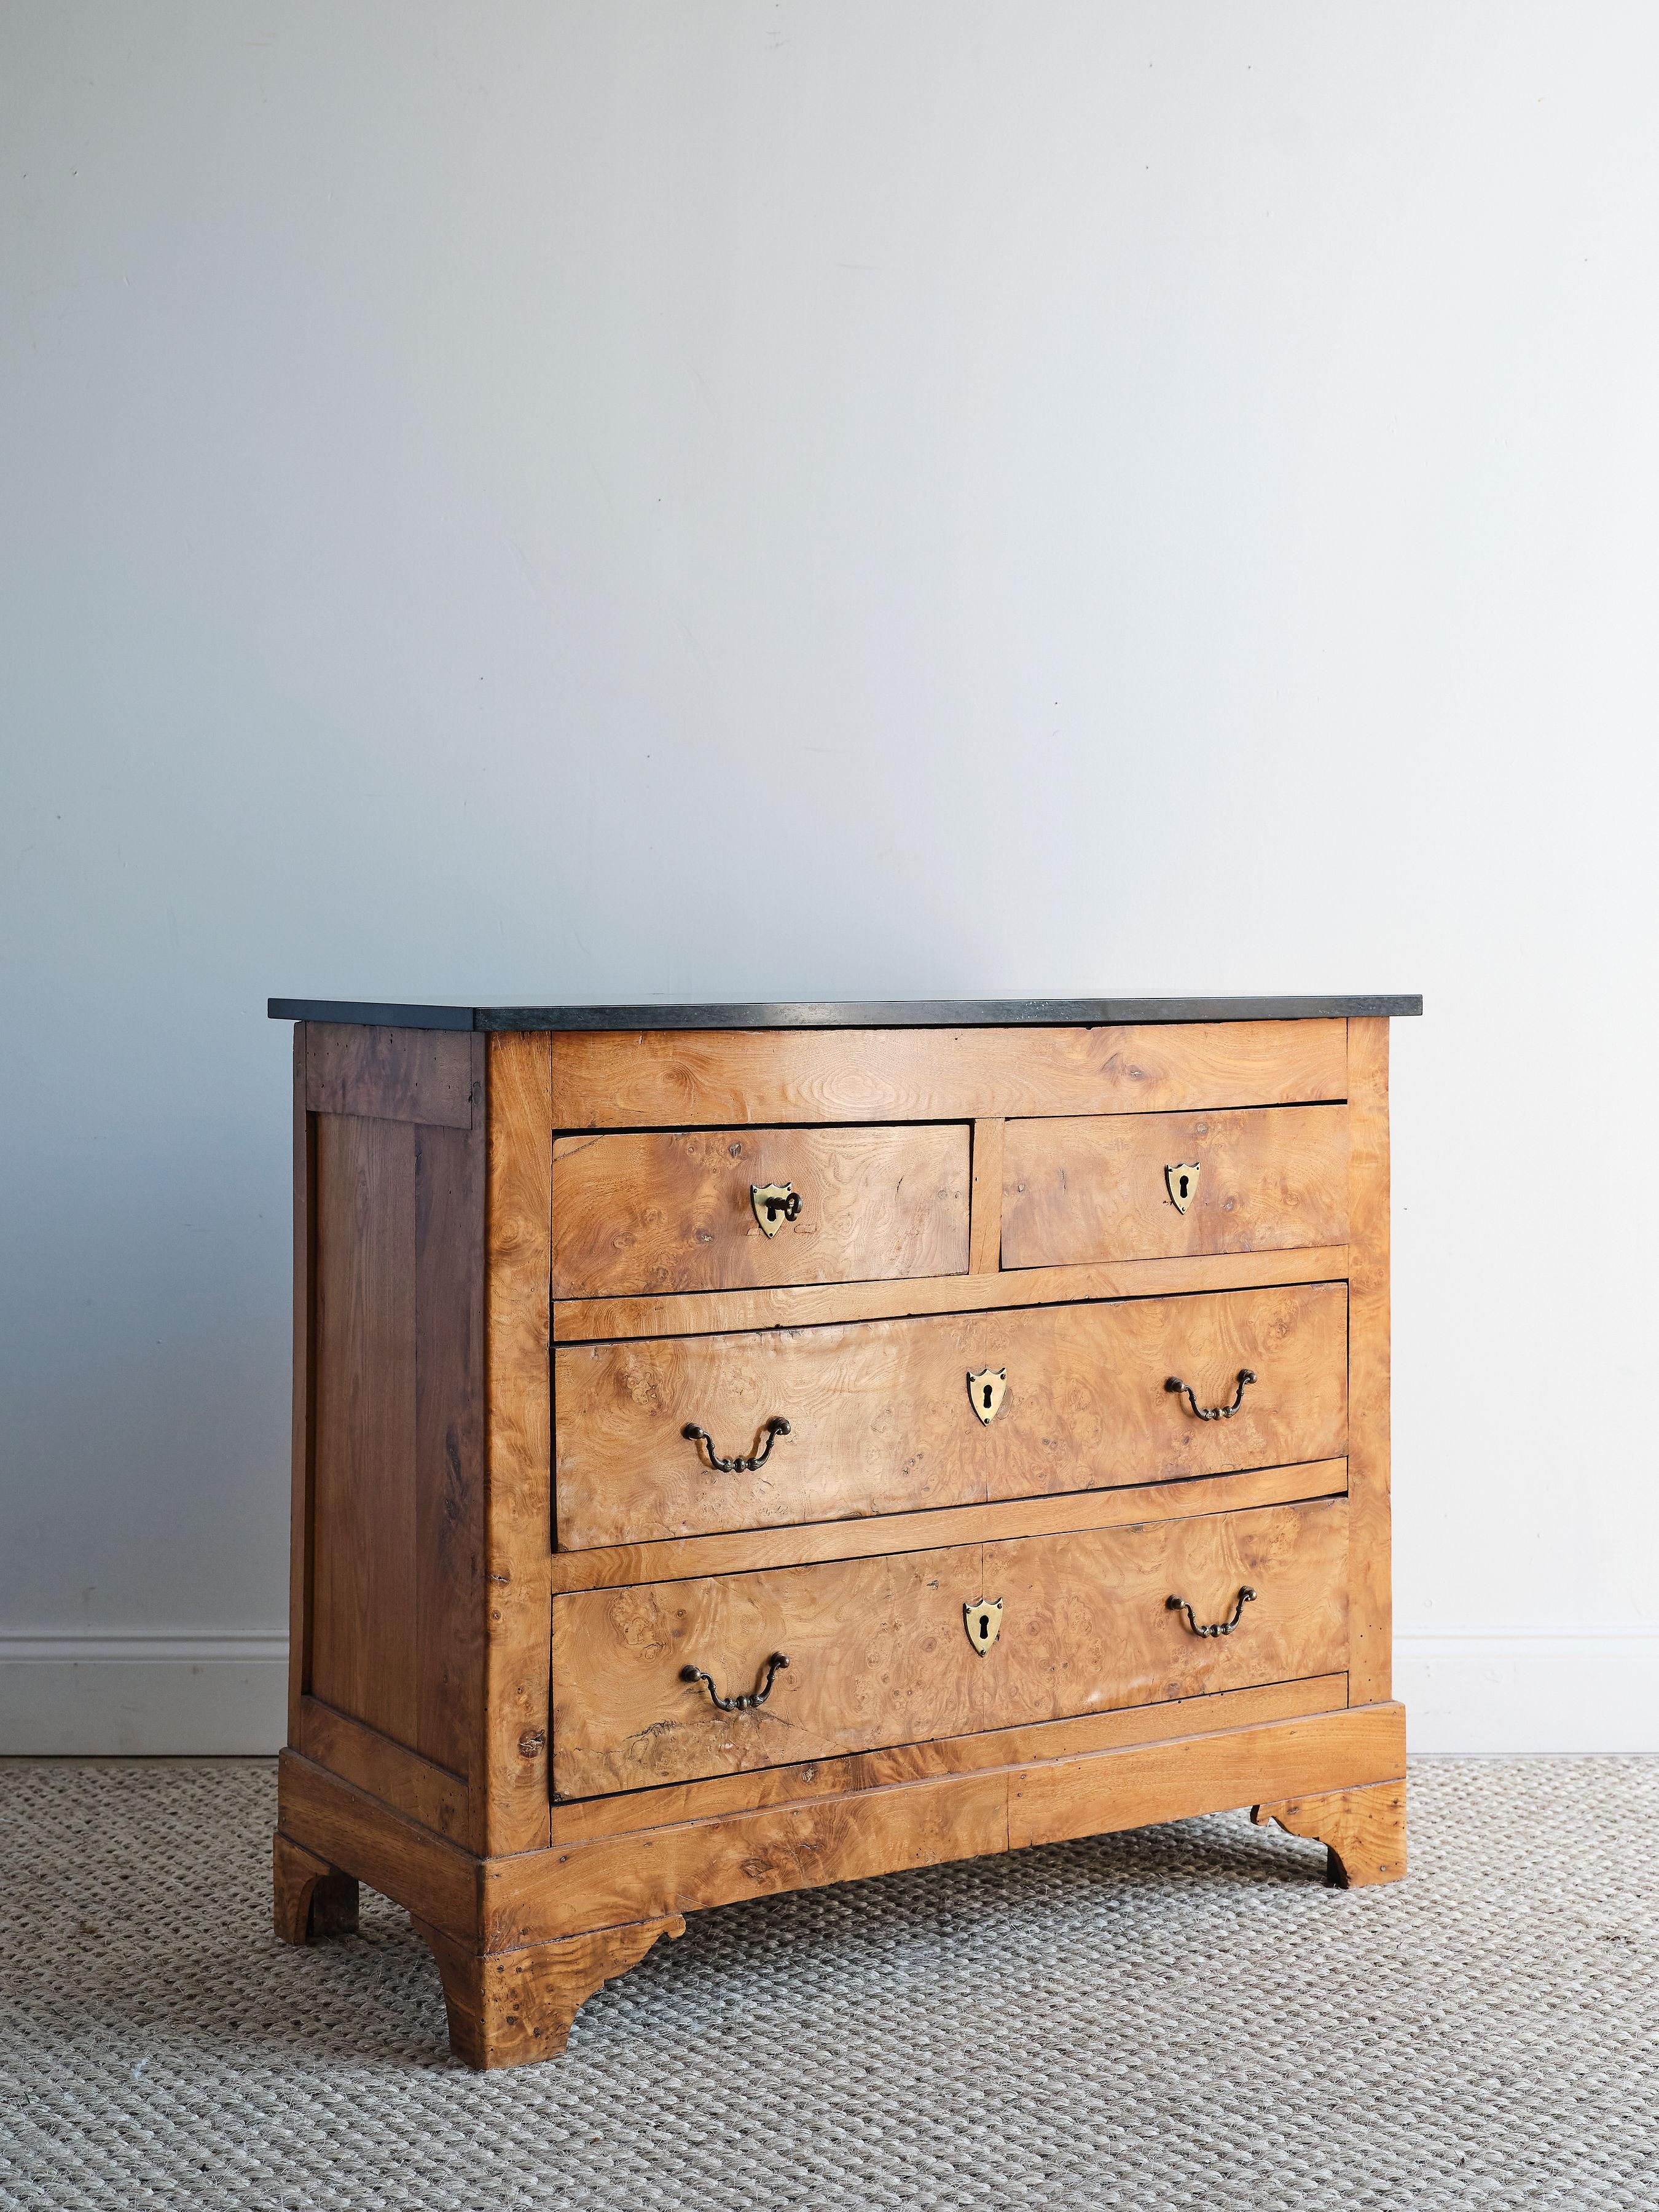 A French burled beauty! This stunning Louis Philippe chest features a dark grey marble top and beautiful walnut burled wood. There are two small top drawers and two large bottom drawers with working locks and key. All of the hardware is original